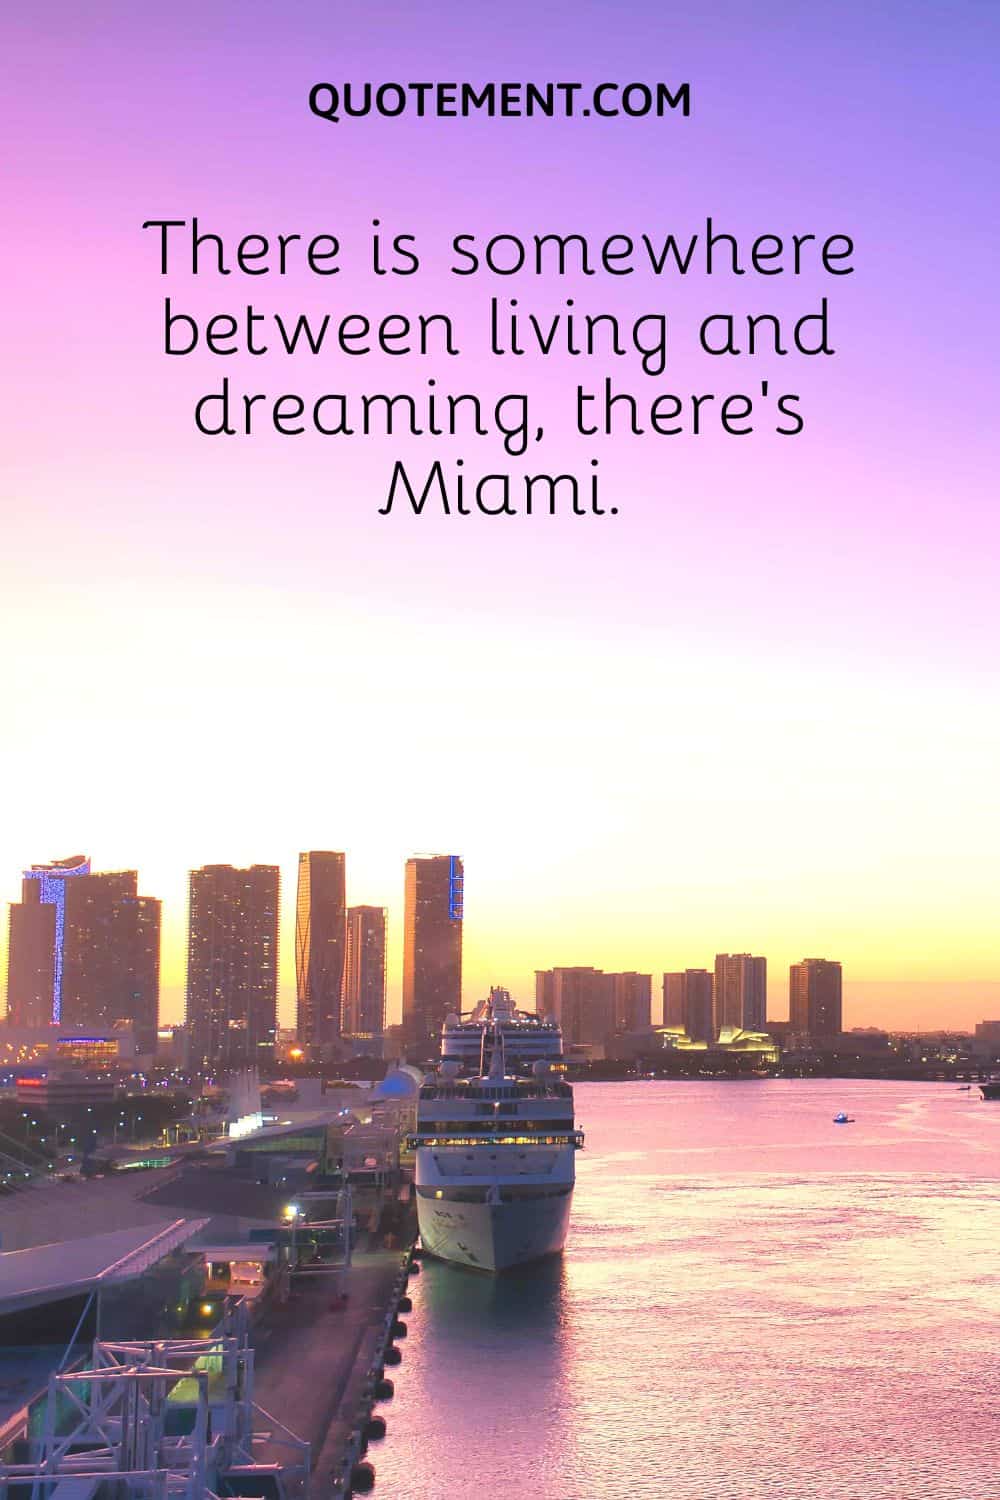 There is somewhere between living and dreaming, there’s Miami